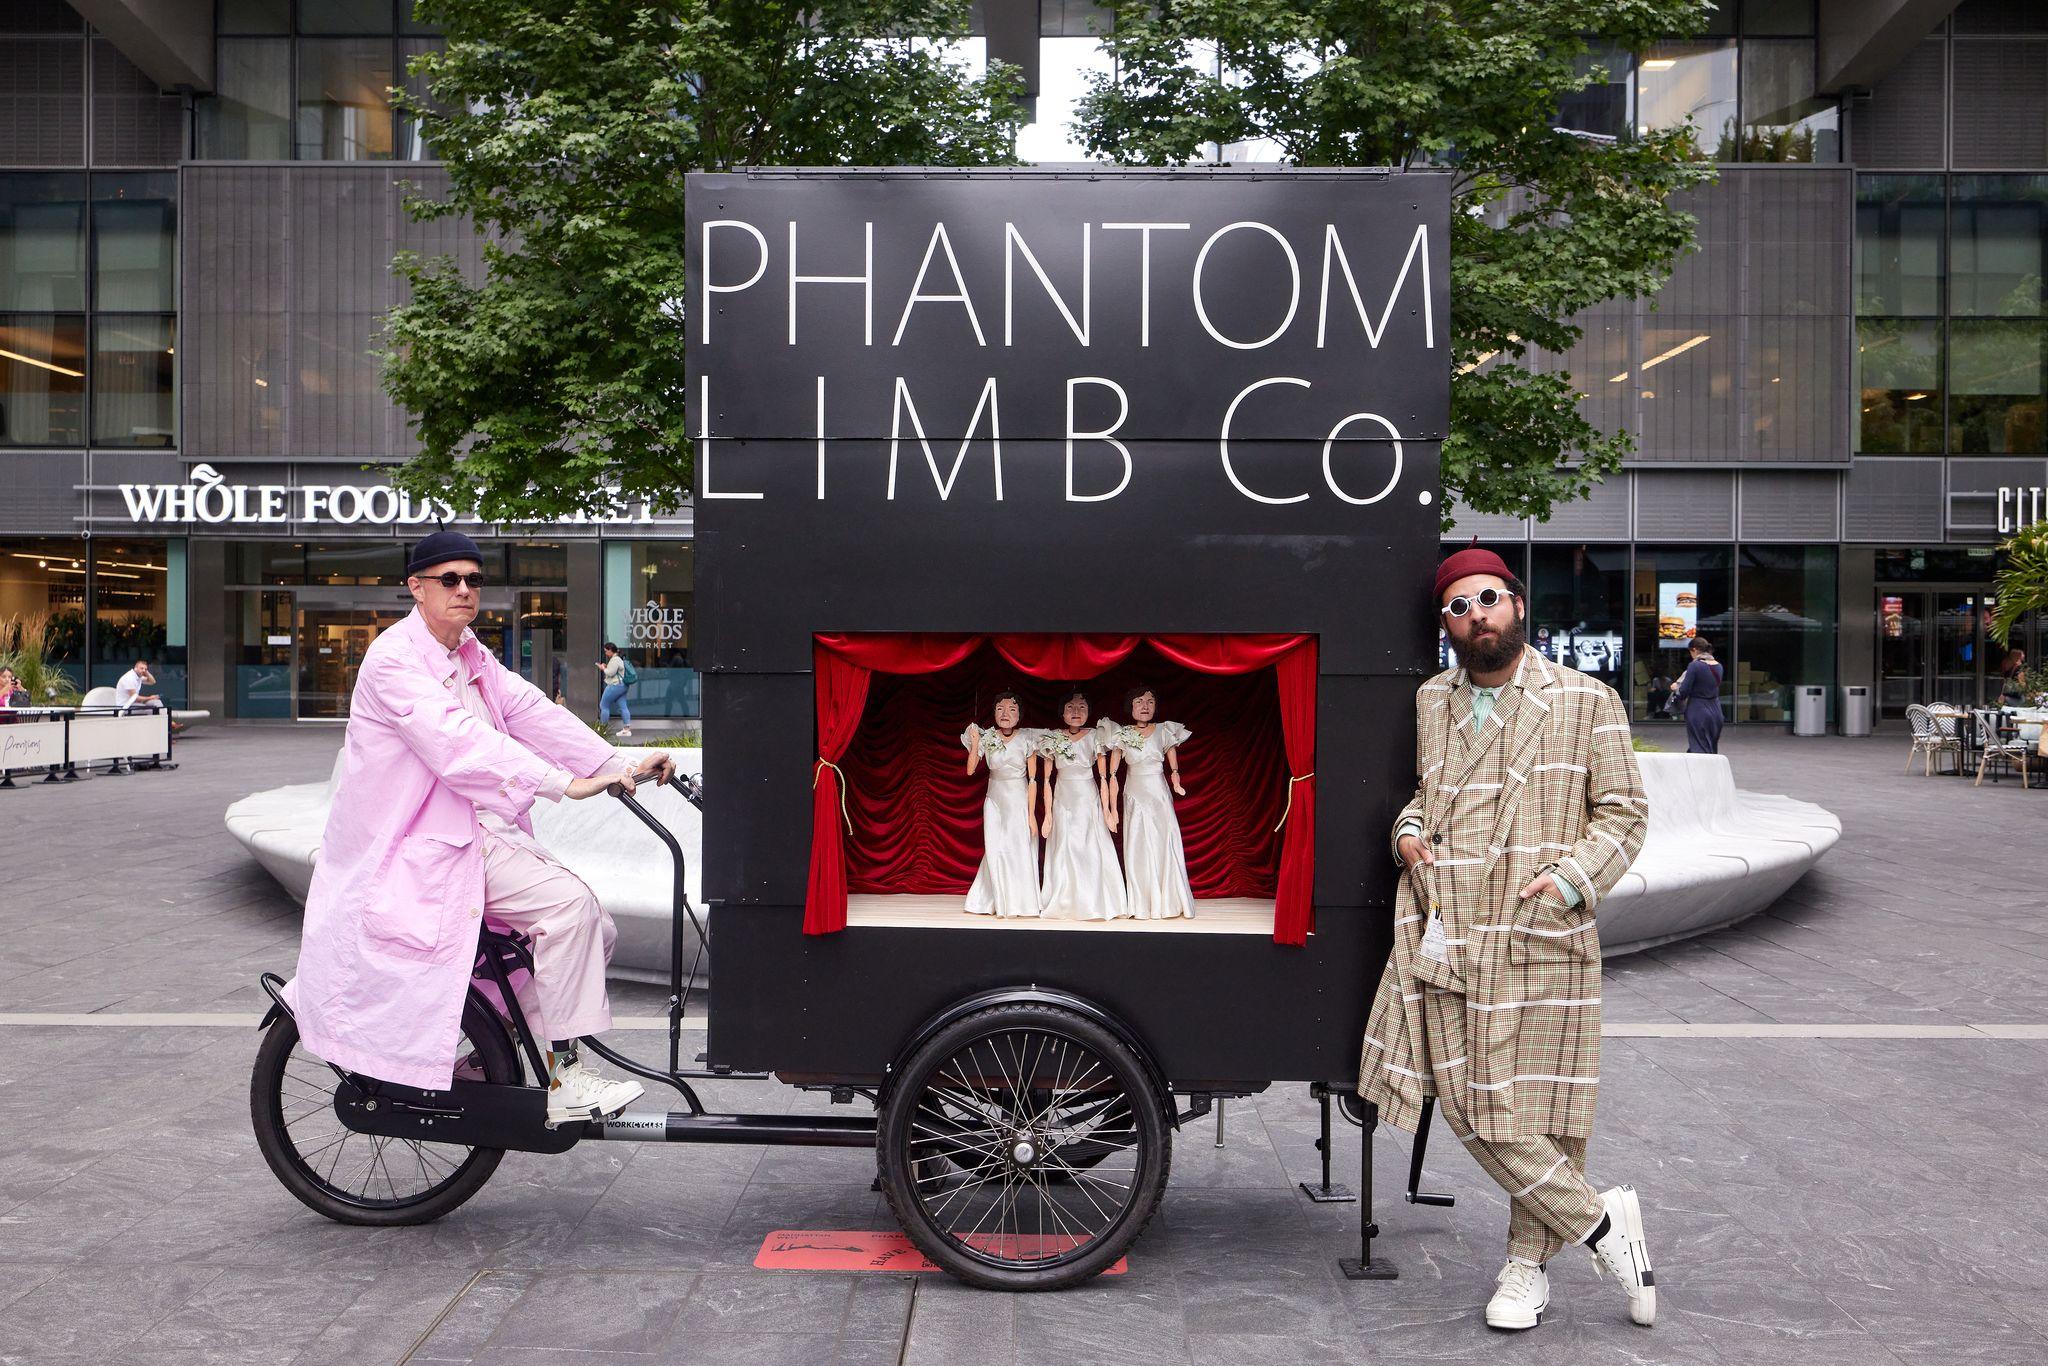 A man posed in a pink trench coat, black beanie, and sunglasses, seated atop cargo bicycle with a large black puppet theatre box on it that says Phantom Limb Co. Another man in a beige plaid suit, red beanie and white sunglasses is leaning against the structure, in the middle of an urban plaza surrounded by people, trees, and buildings